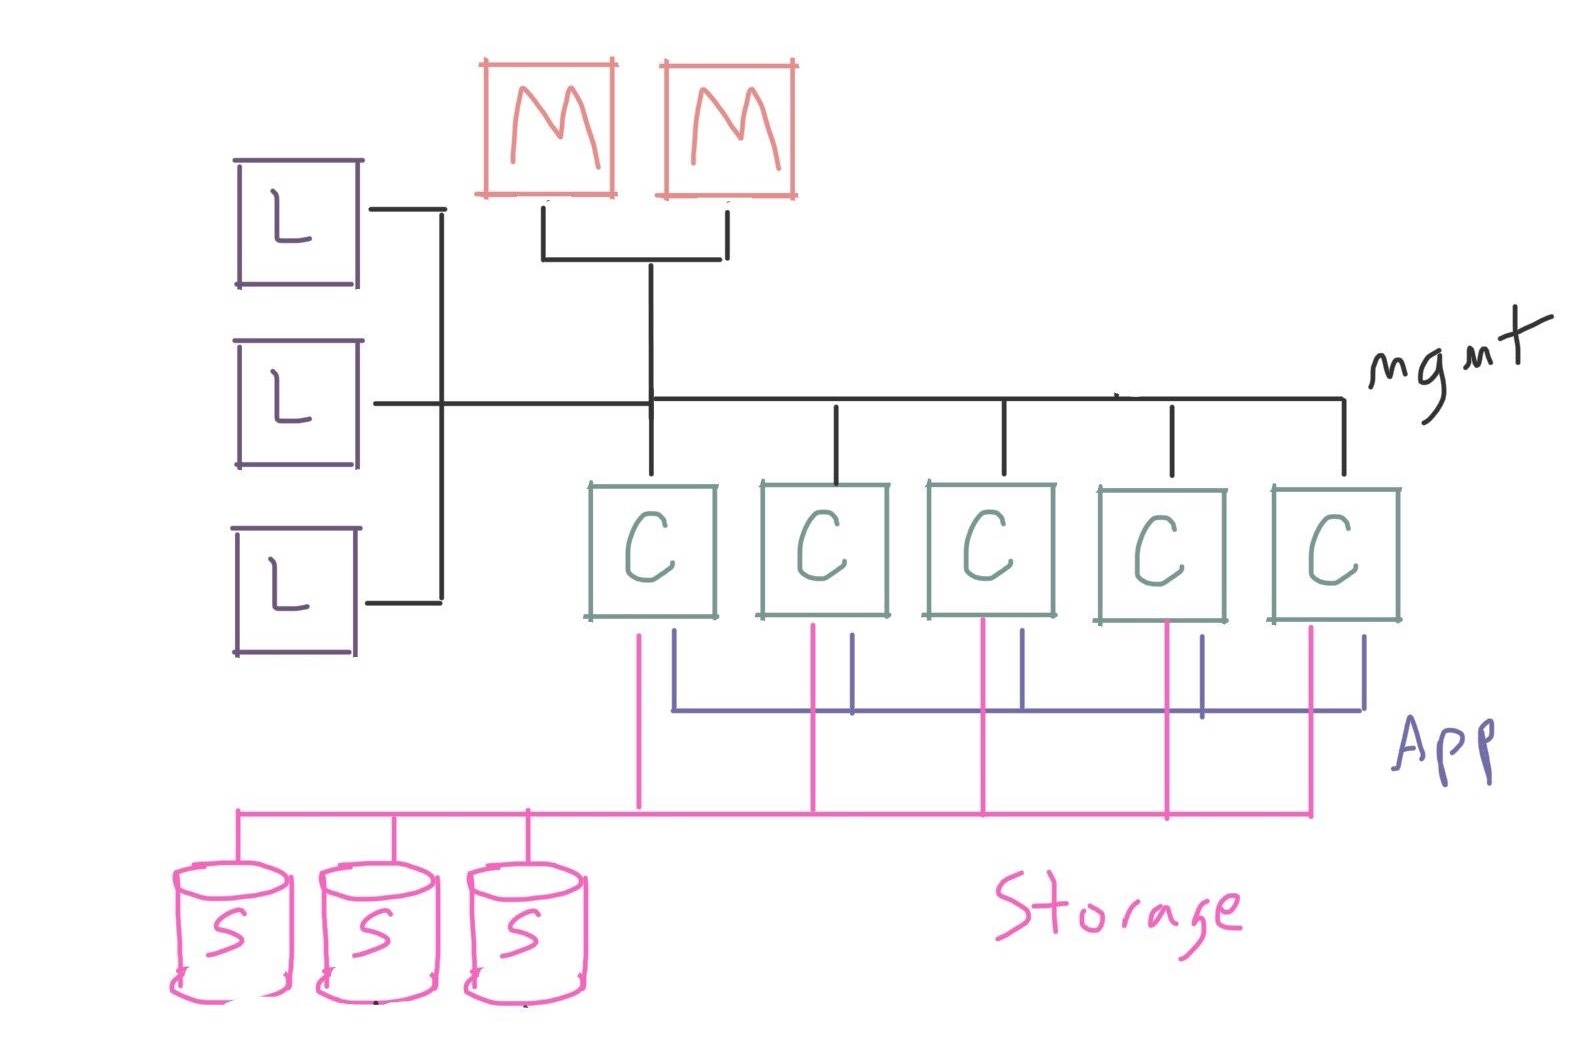 Same diagram, but add a separate application network connecting only the compute nodes , and a separate storage network connecting storage and compute only